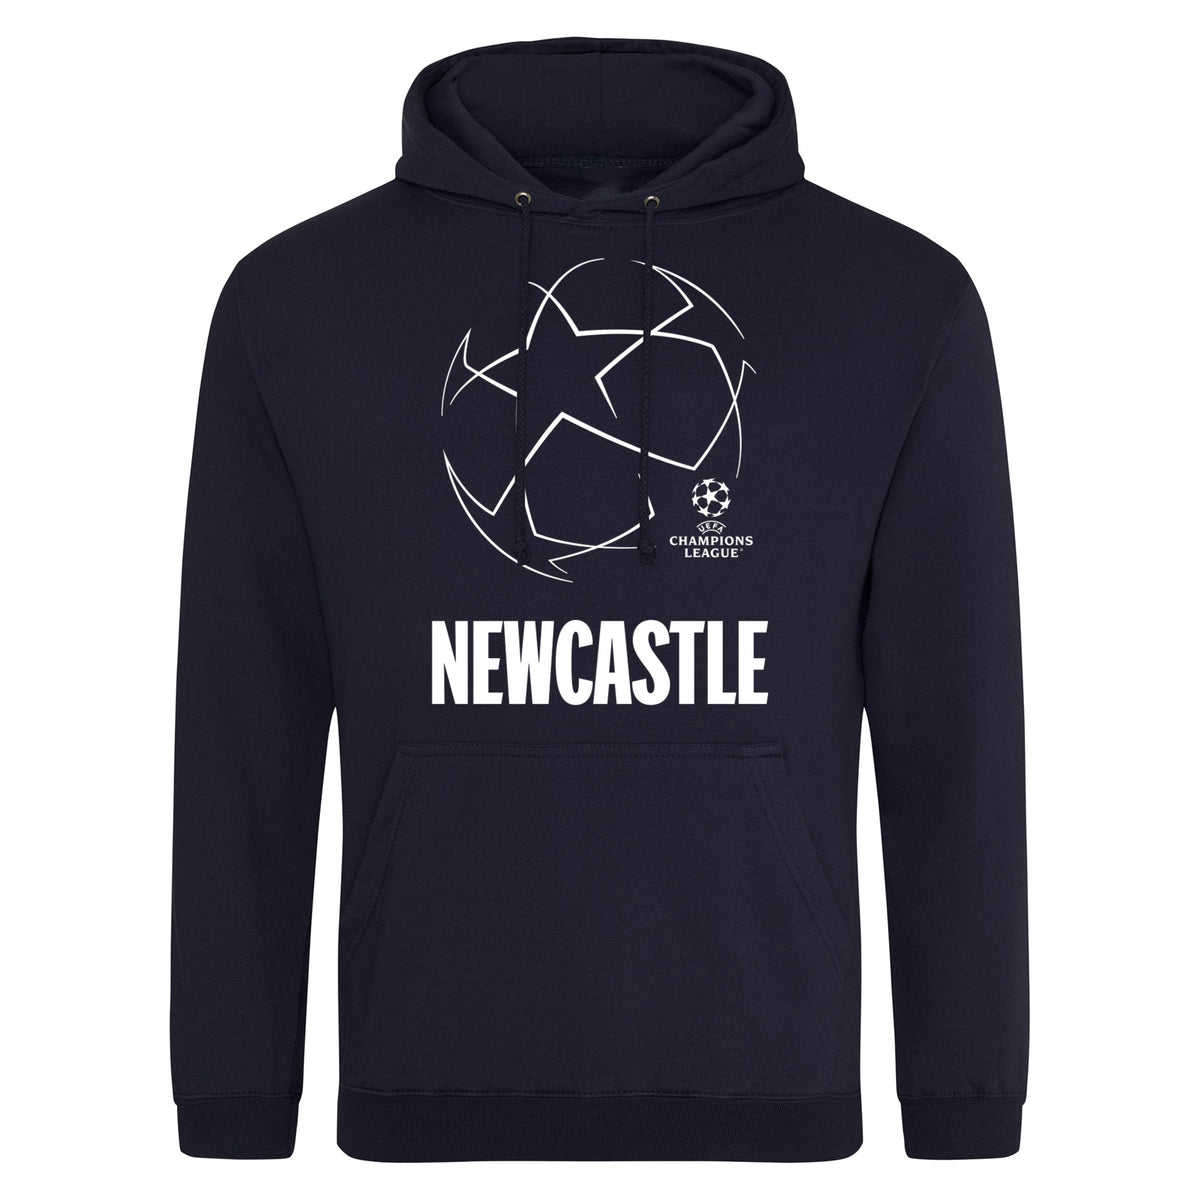 Champions League Starball Newcastle City Hoodie Navy